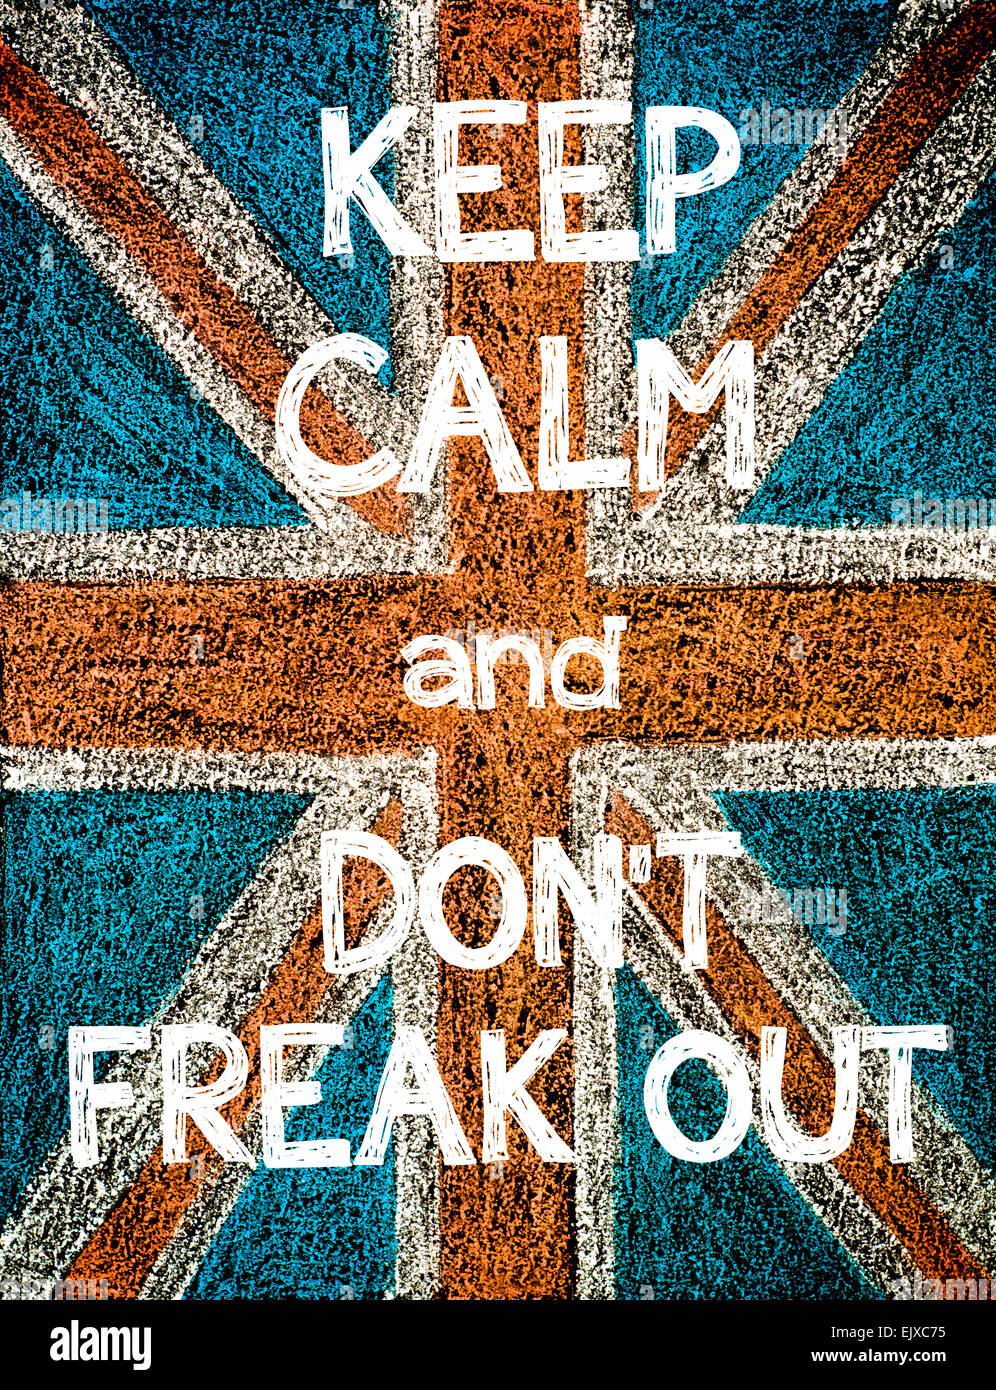 Keep Calm and Don't Freak Out. United Kingdom (British Union jack) flag, vintage hand drawing with chalk on blackboard, humor concept image Stock Photo